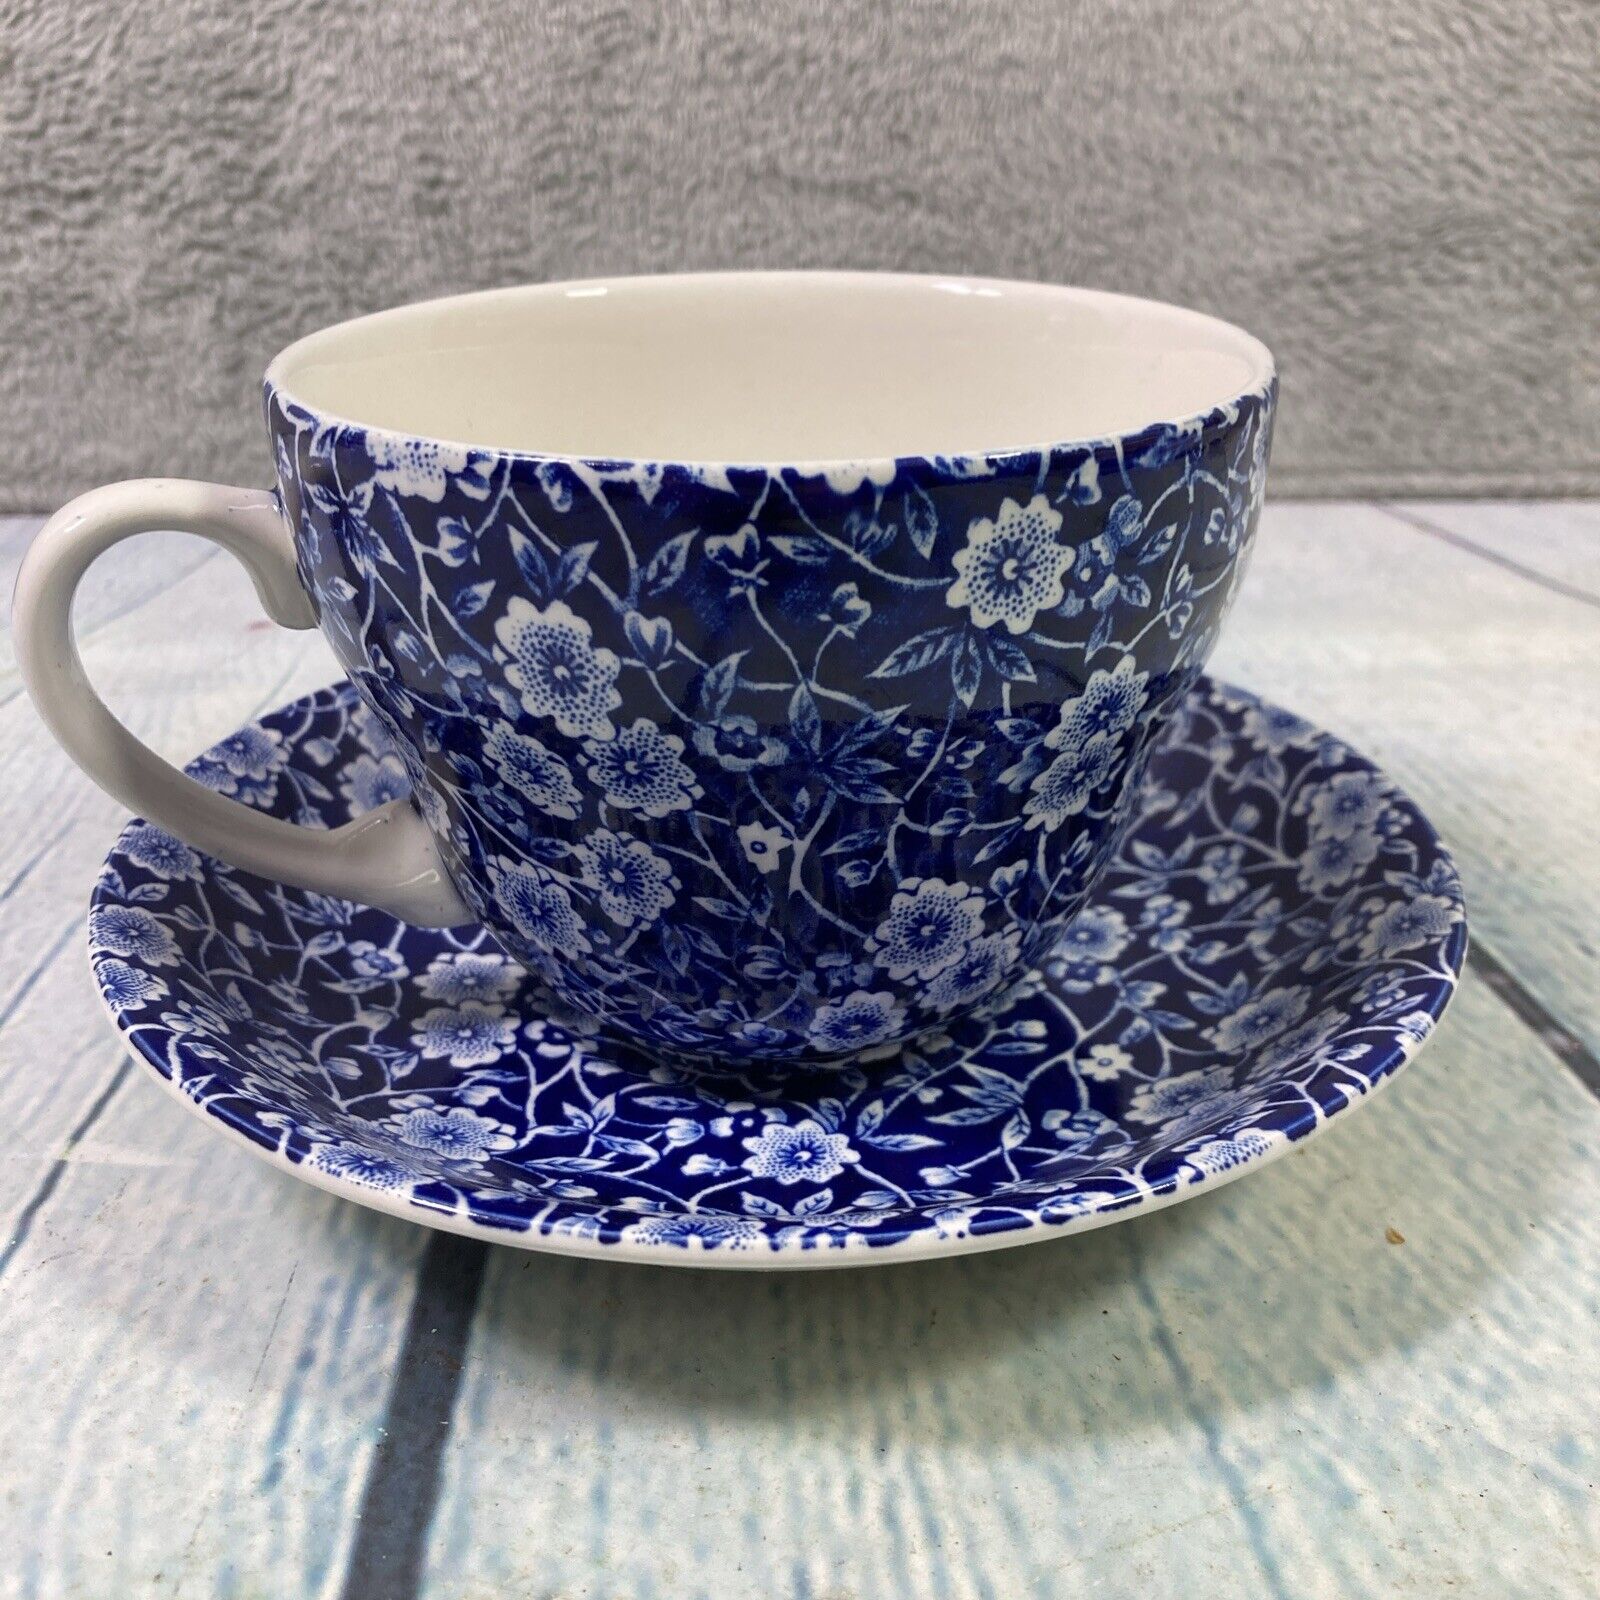 Calico Burleigh Breakfast Cup and Saucer Blue White Flowers Made in England